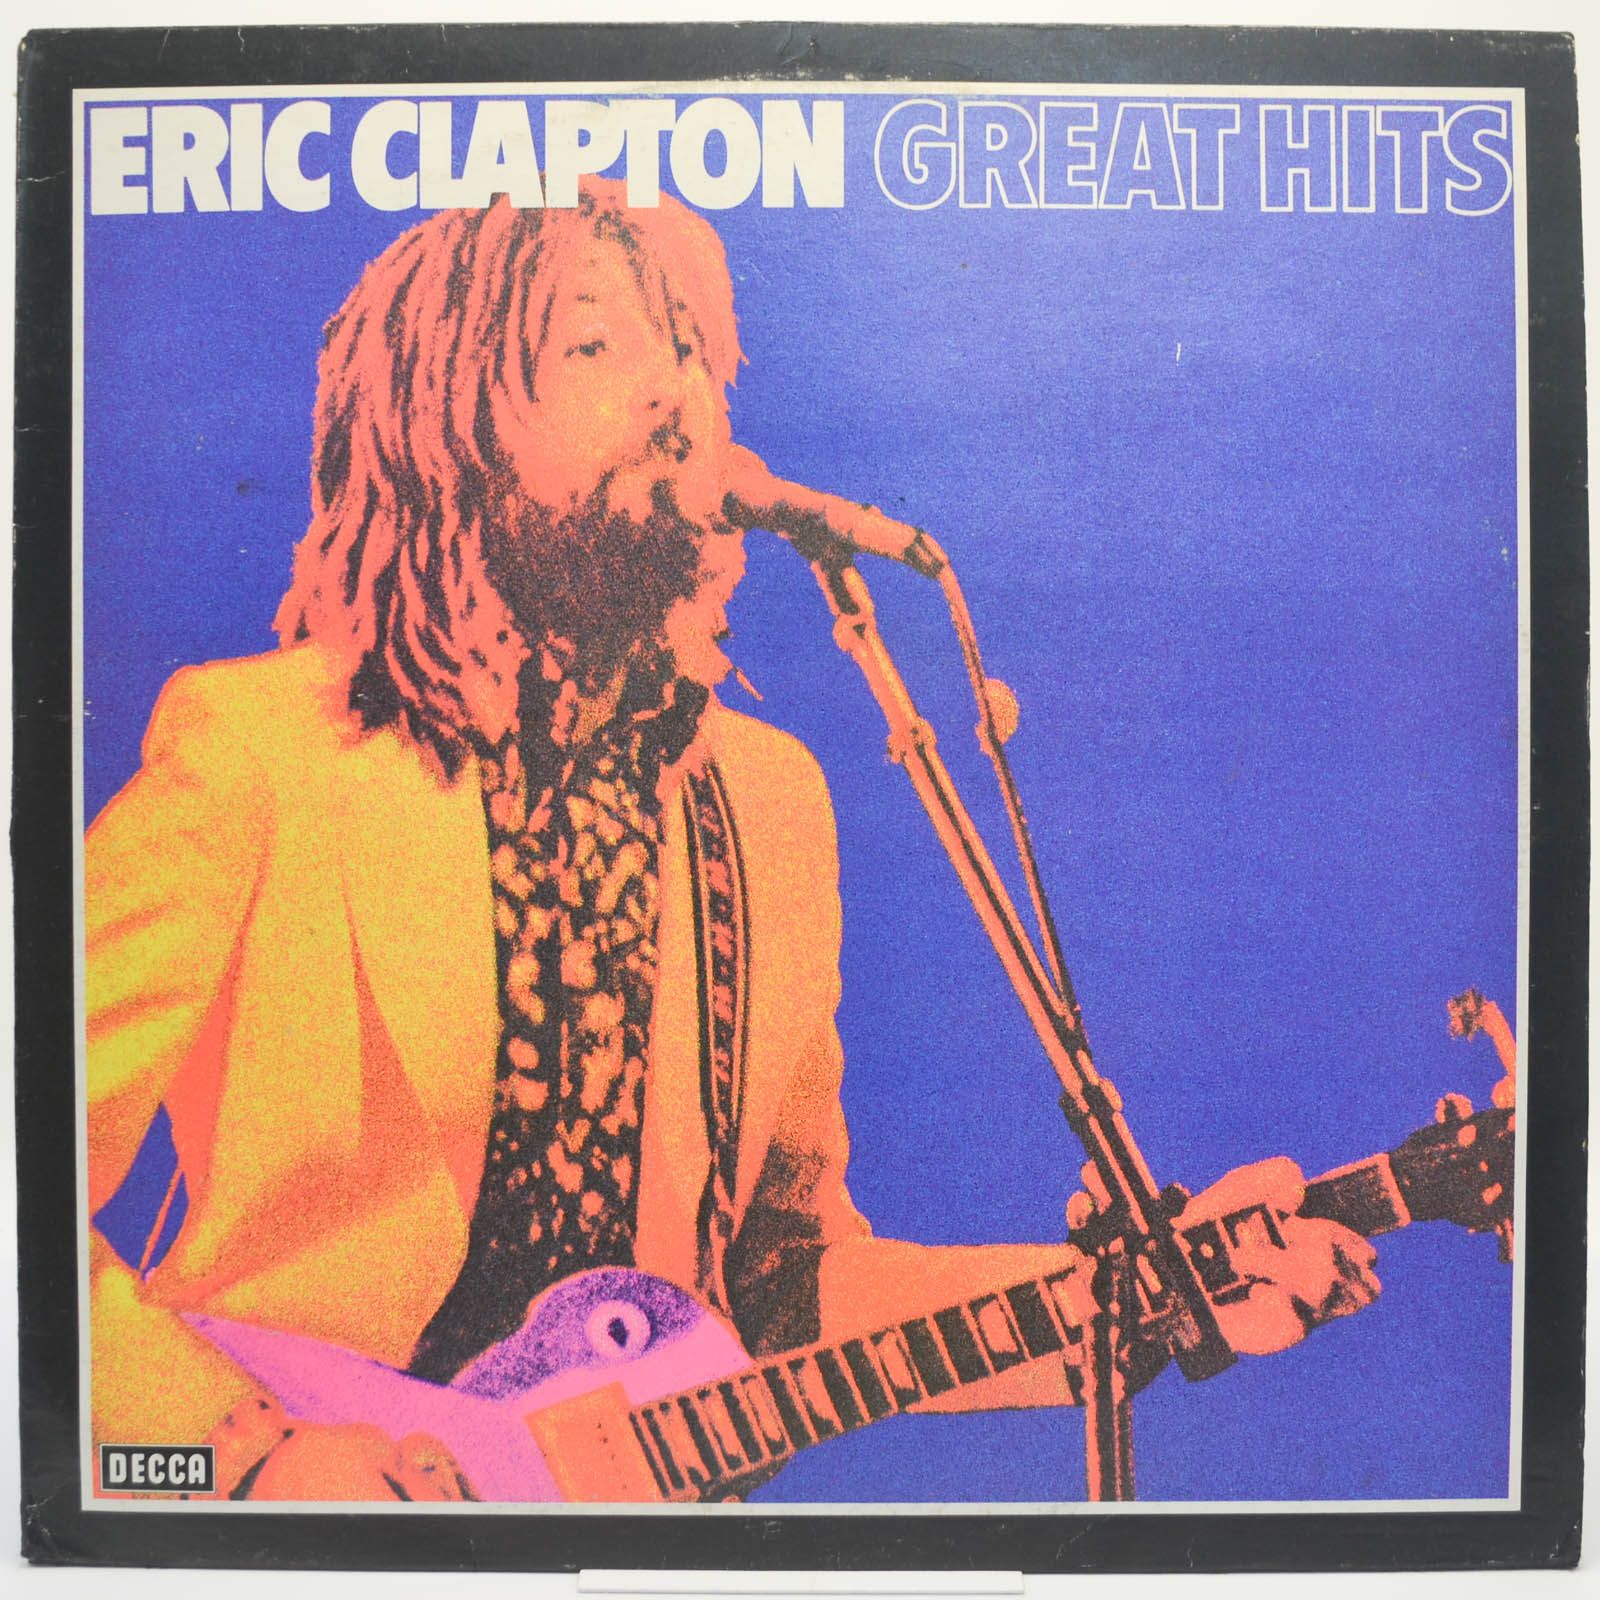 Eric Clapton — Great Hits, 1975